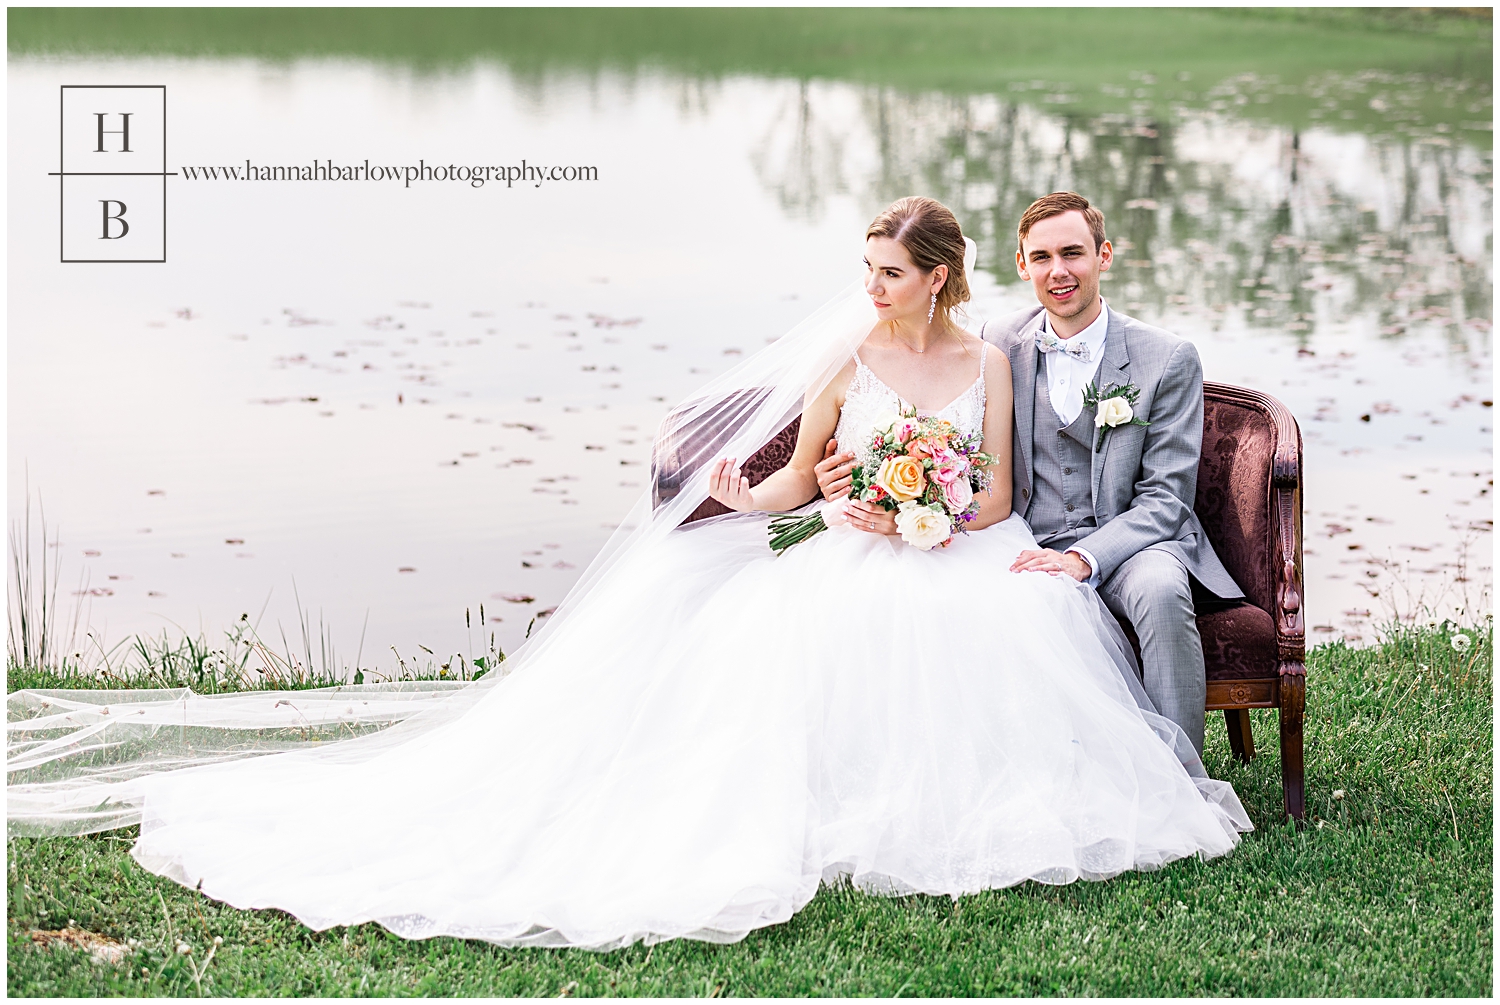 Bride and groom sit on chair by lake while bride looks on and groom looks at camera.